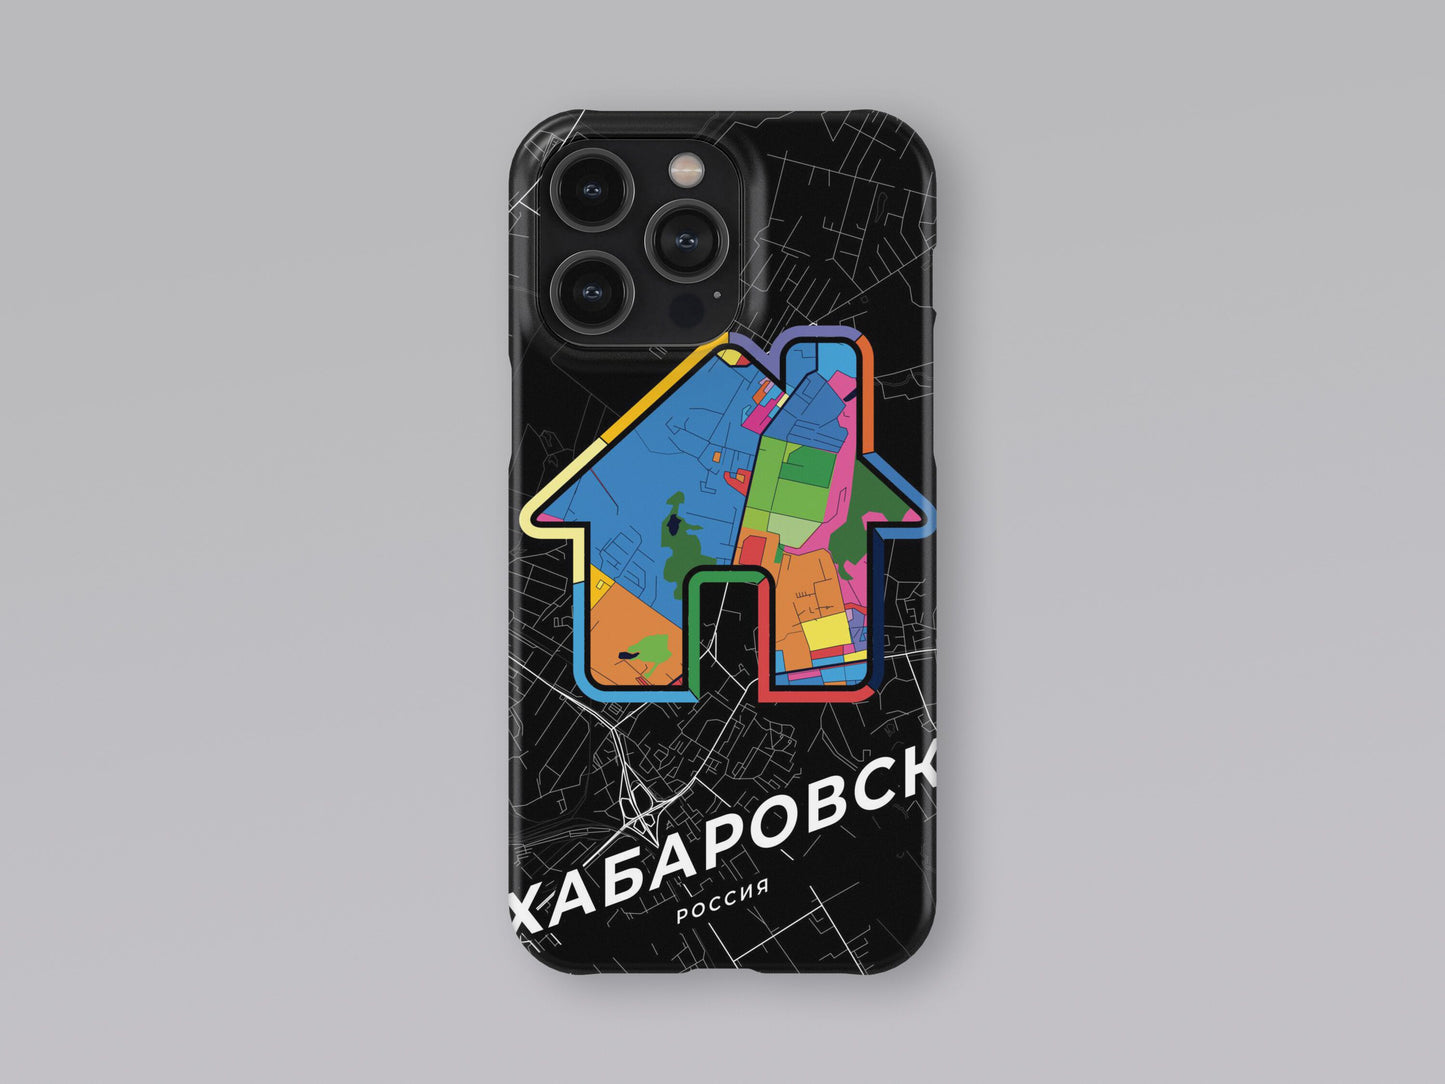 Khabarovsk Russia slim phone case with colorful icon. Birthday, wedding or housewarming gift. Couple match cases. 3